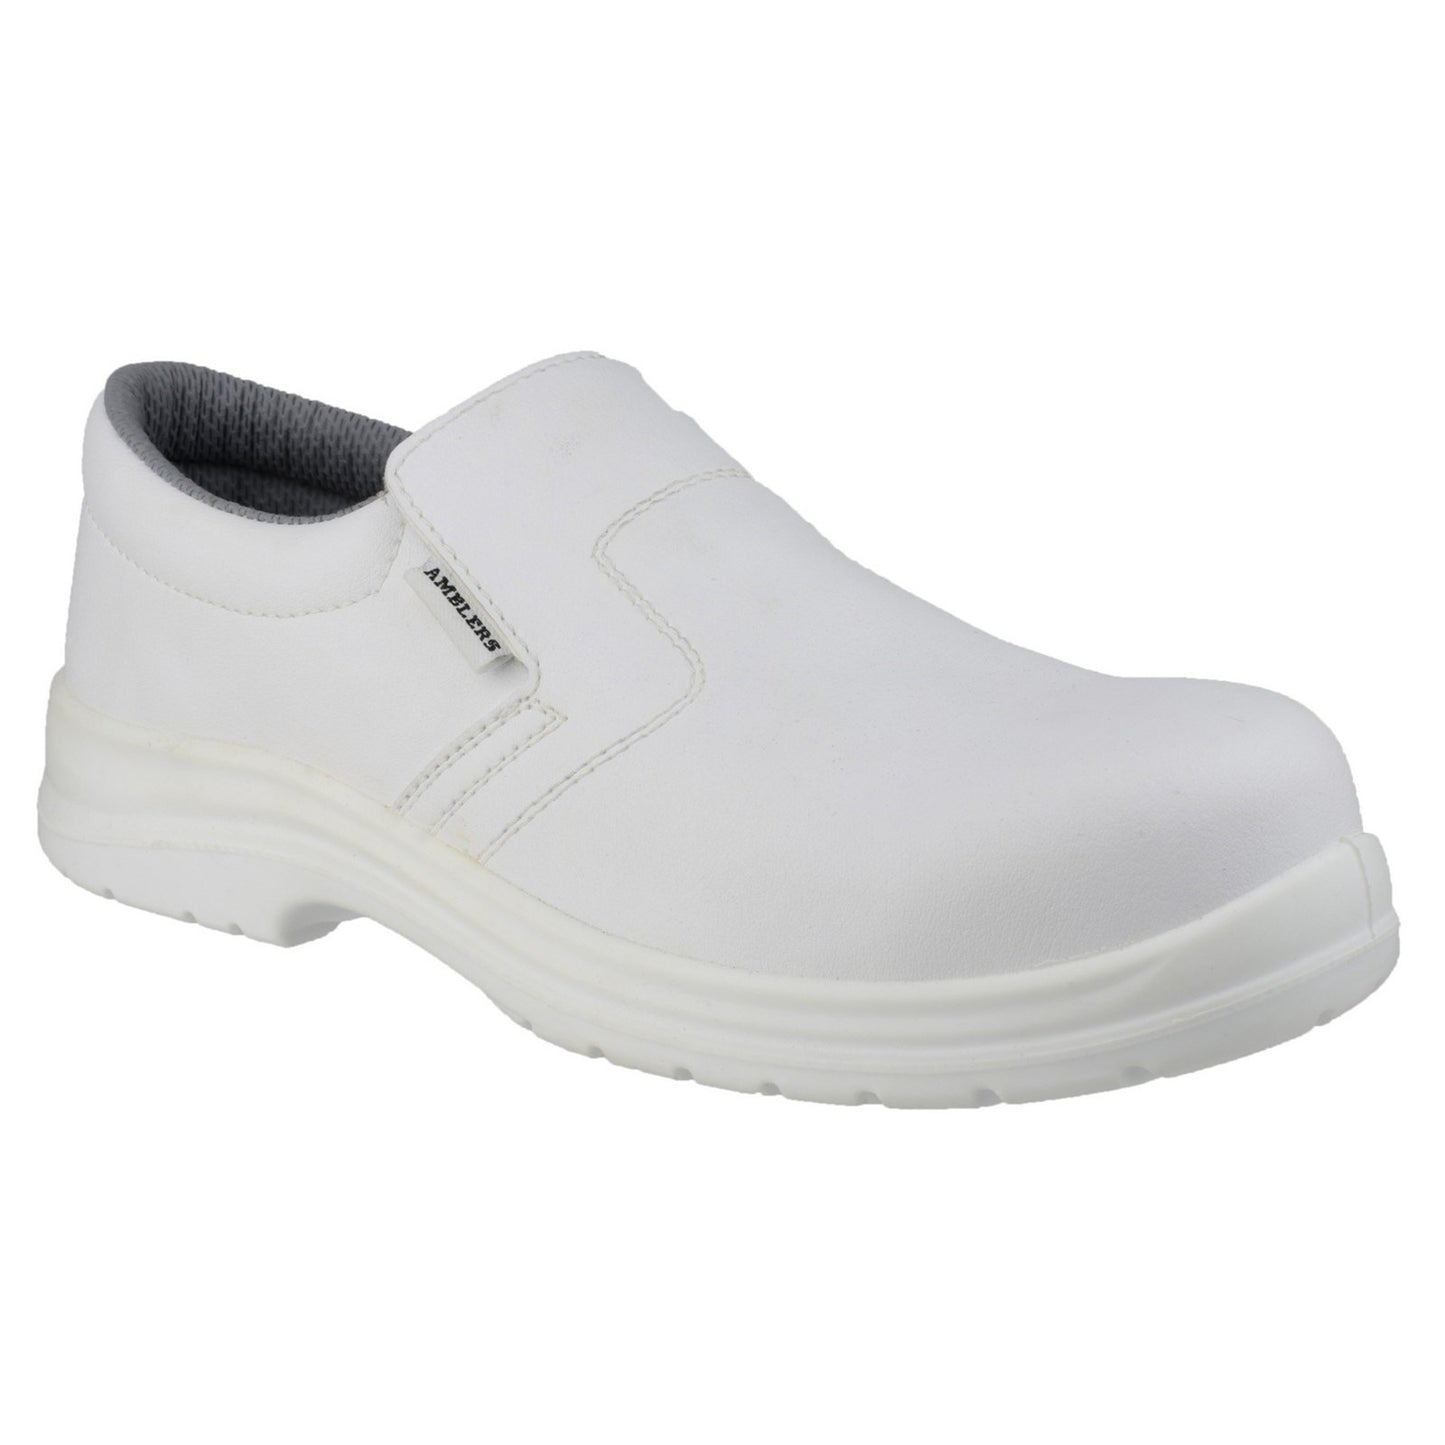 FS510 Metal-Free Water-Resistant Slip on Safety Shoe, Amblers Safety